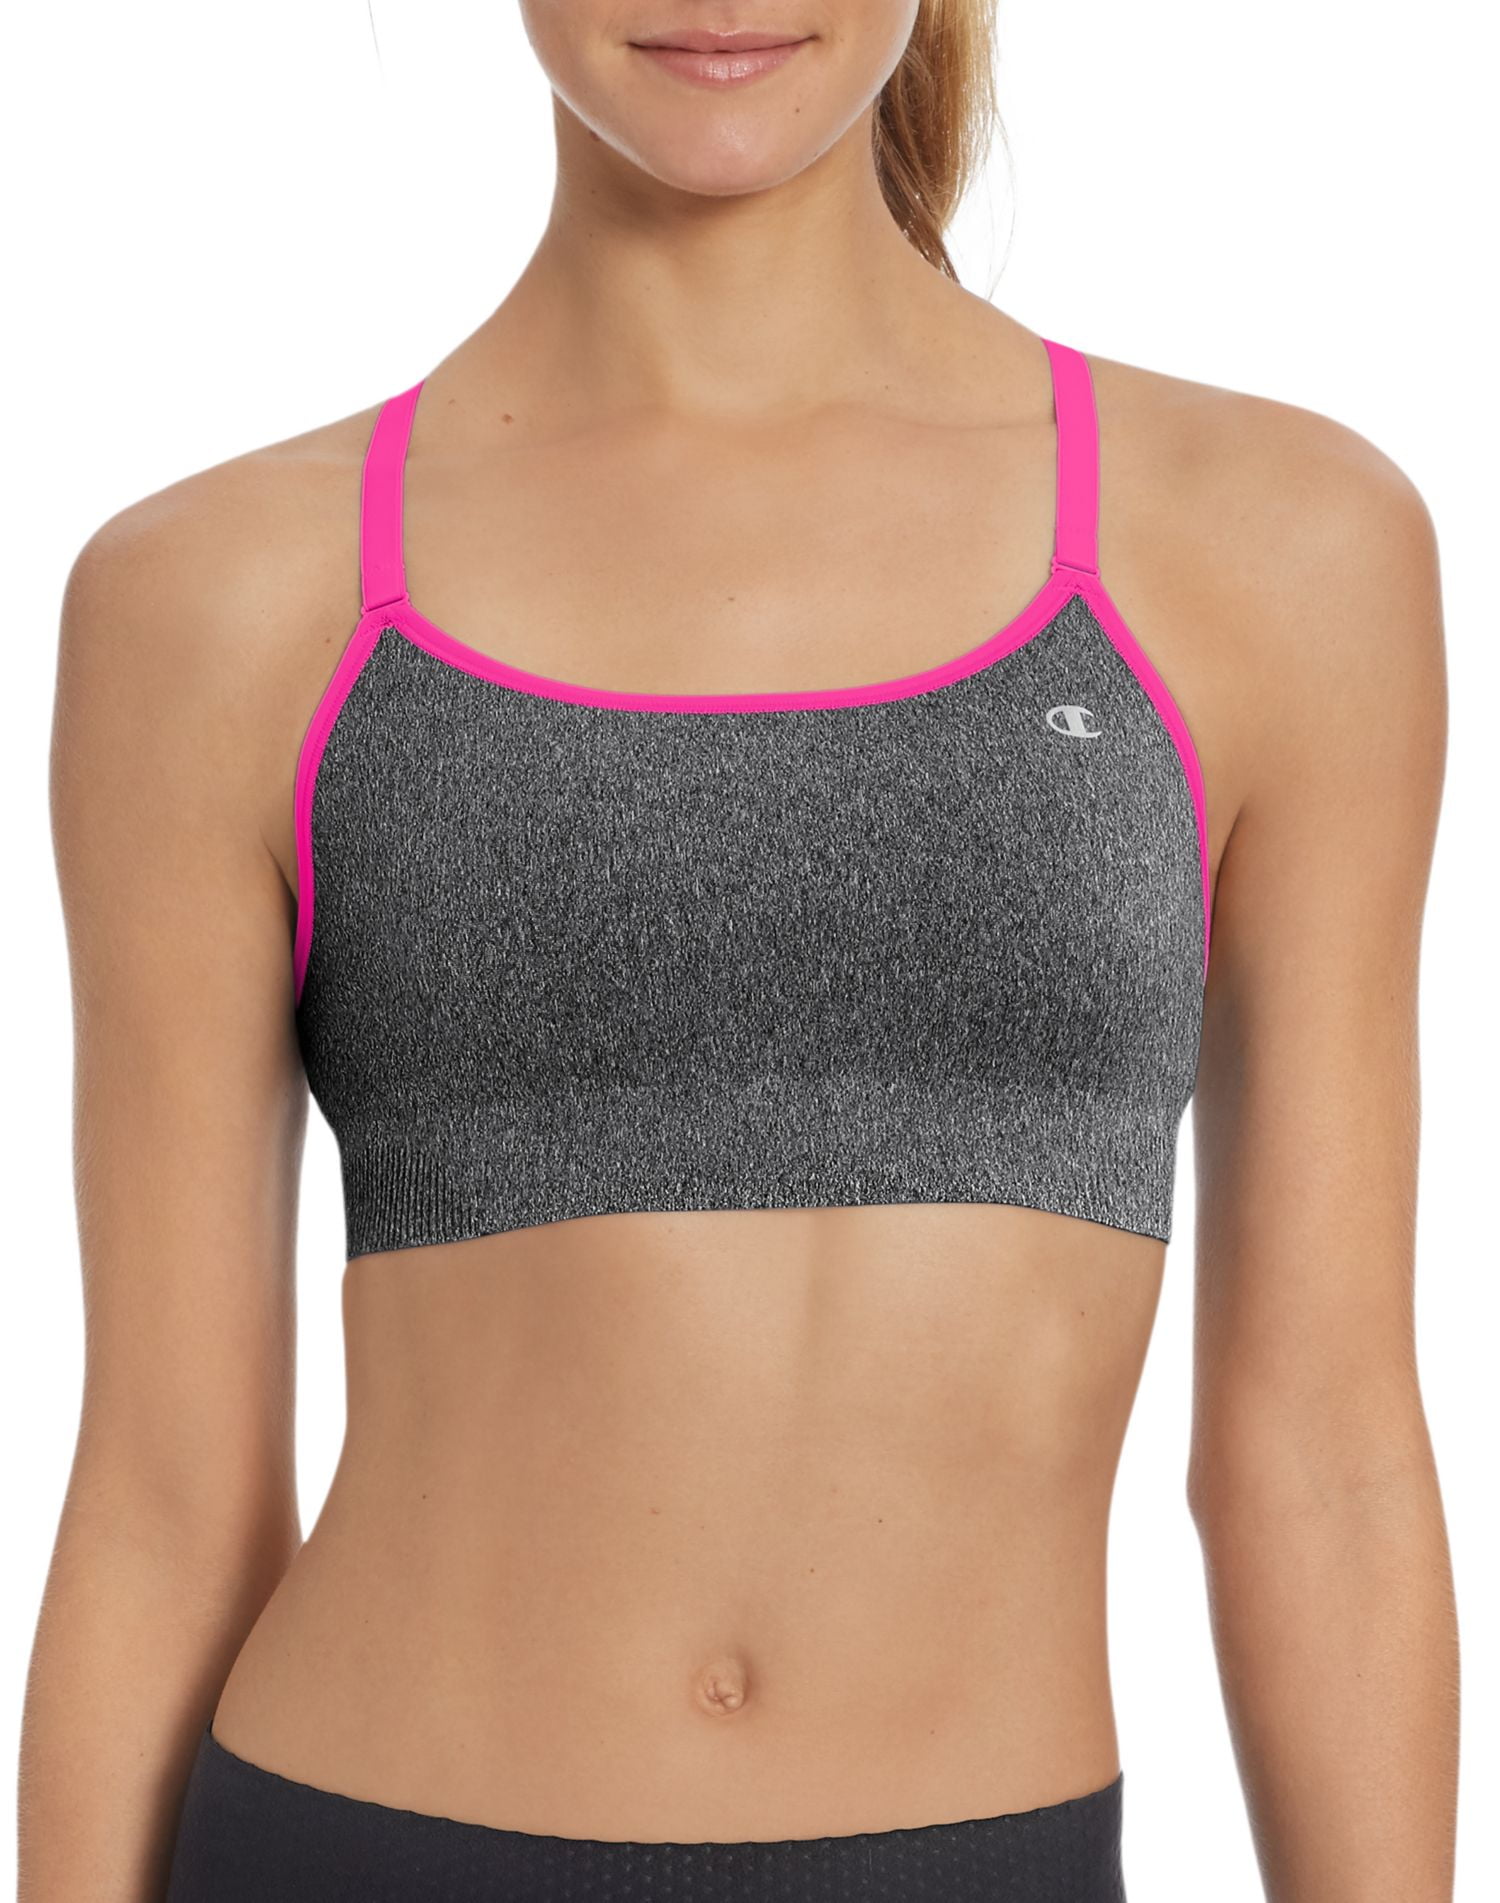 Absolute Cami Sports Bra with SmoothTec Band - Walmart.com